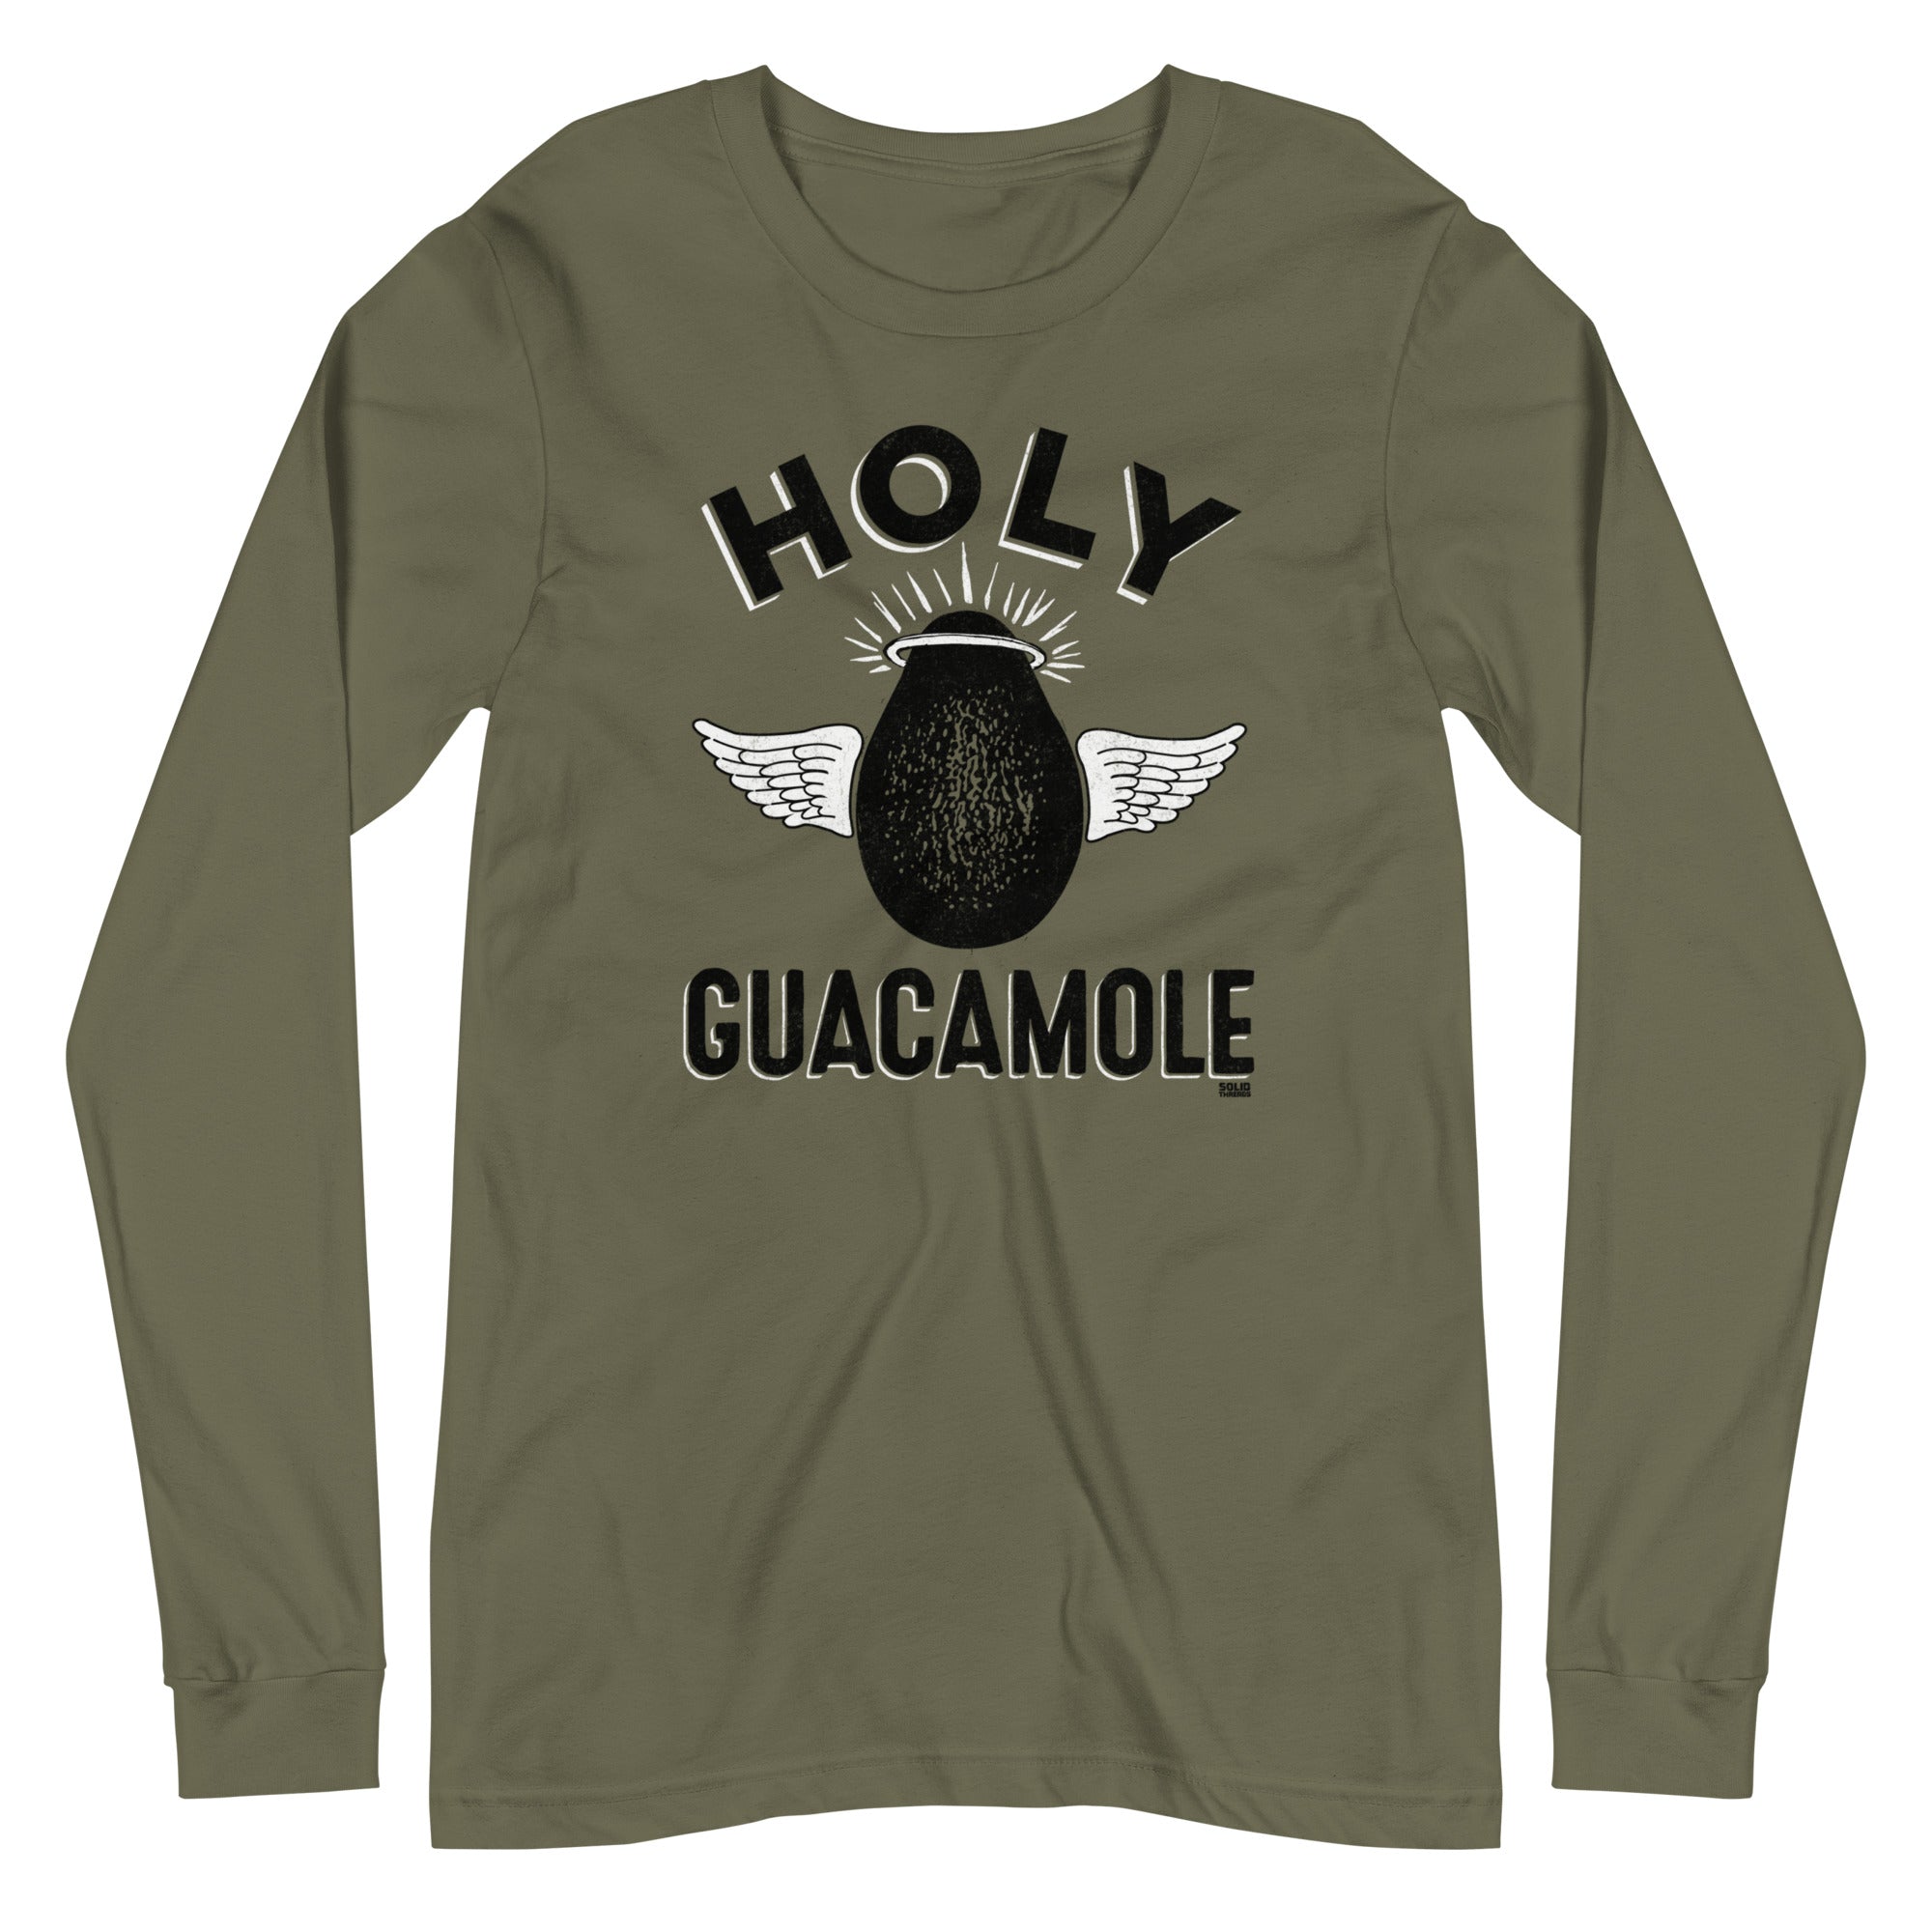 Holy Guacamole Vintage Graphic Long Sleeve Tee | Funny Food T-Shirt - Solid Threads